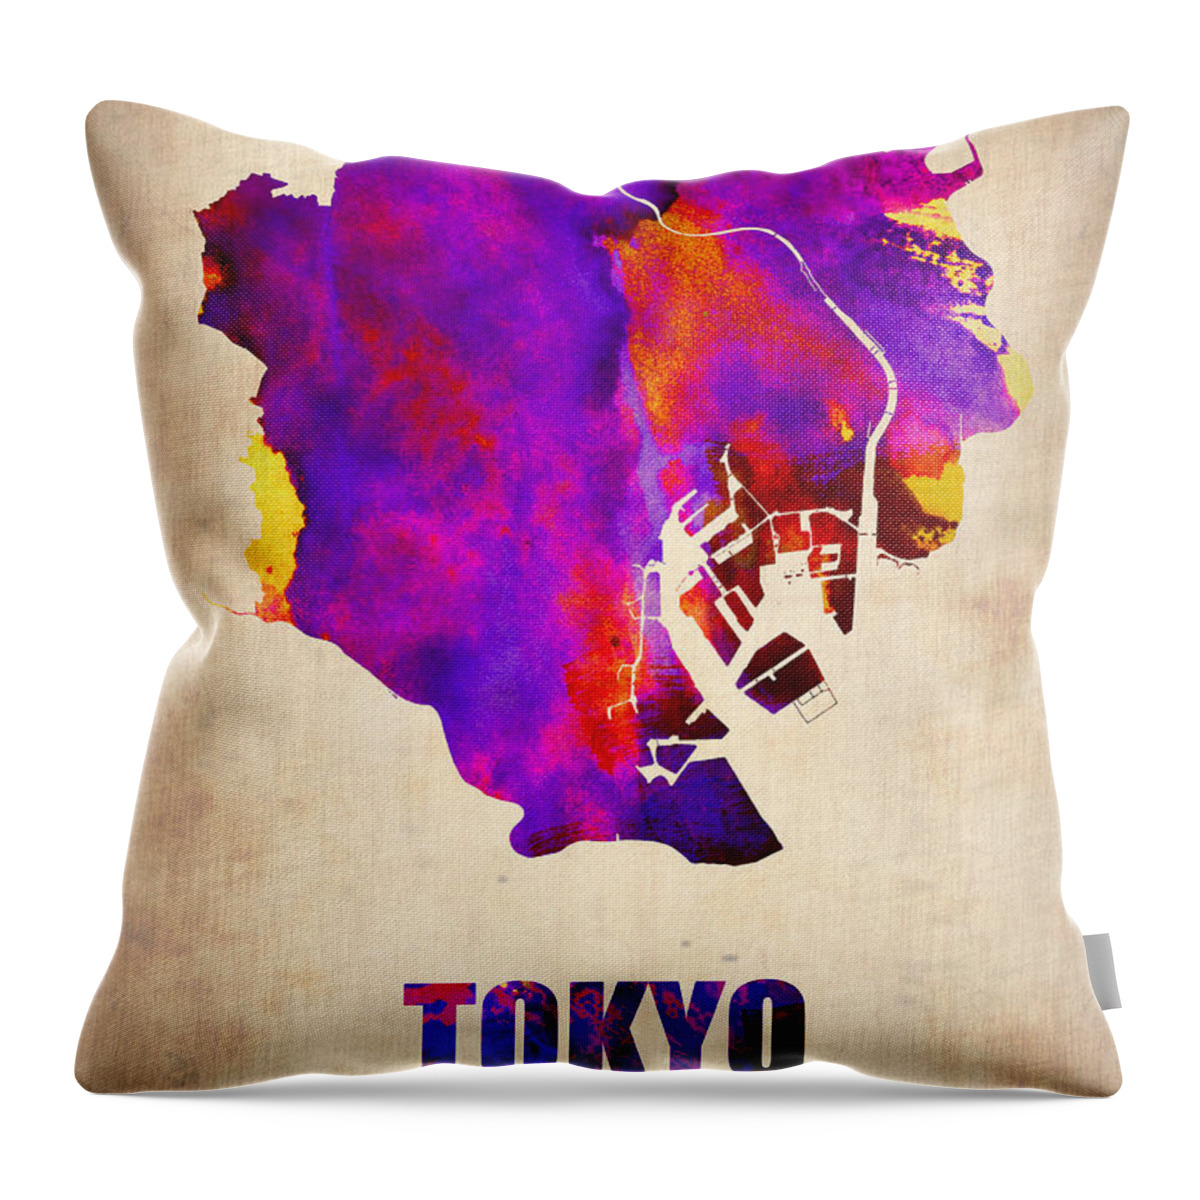 Tokyo Throw Pillow featuring the painting Tokyo Watercolor Map 2 by Naxart Studio